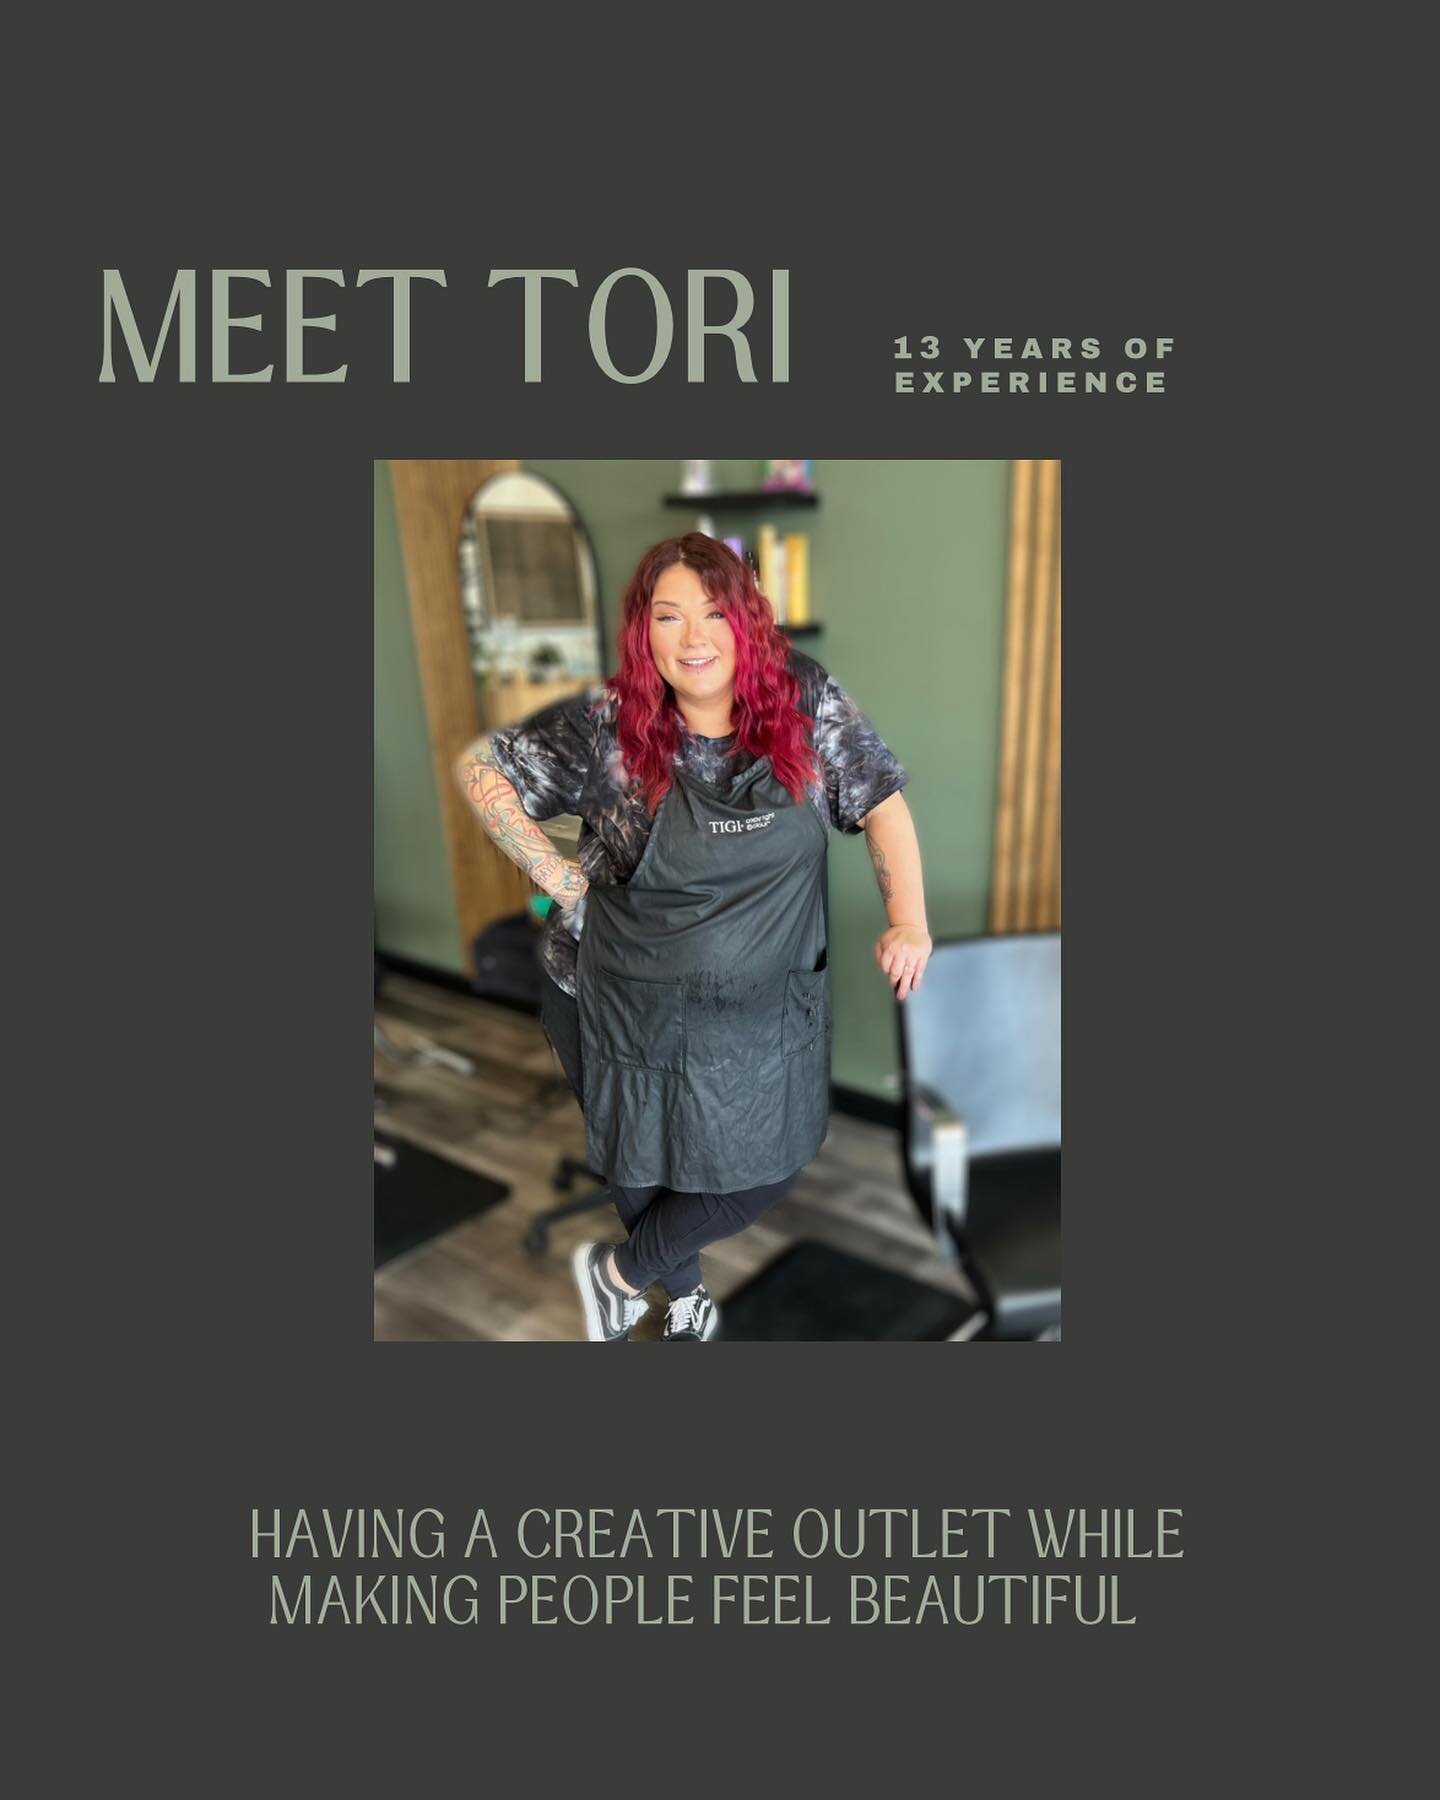 ✨MEET TORI✨ 

Tori has always been my go to gal over the years of being a hairstylist. And I can&rsquo;t even believe she is working with at Adair! She brings so much laughter and joy and is crazy talented. ❤️ 

How many years in the biz? 
&ldquo;13 